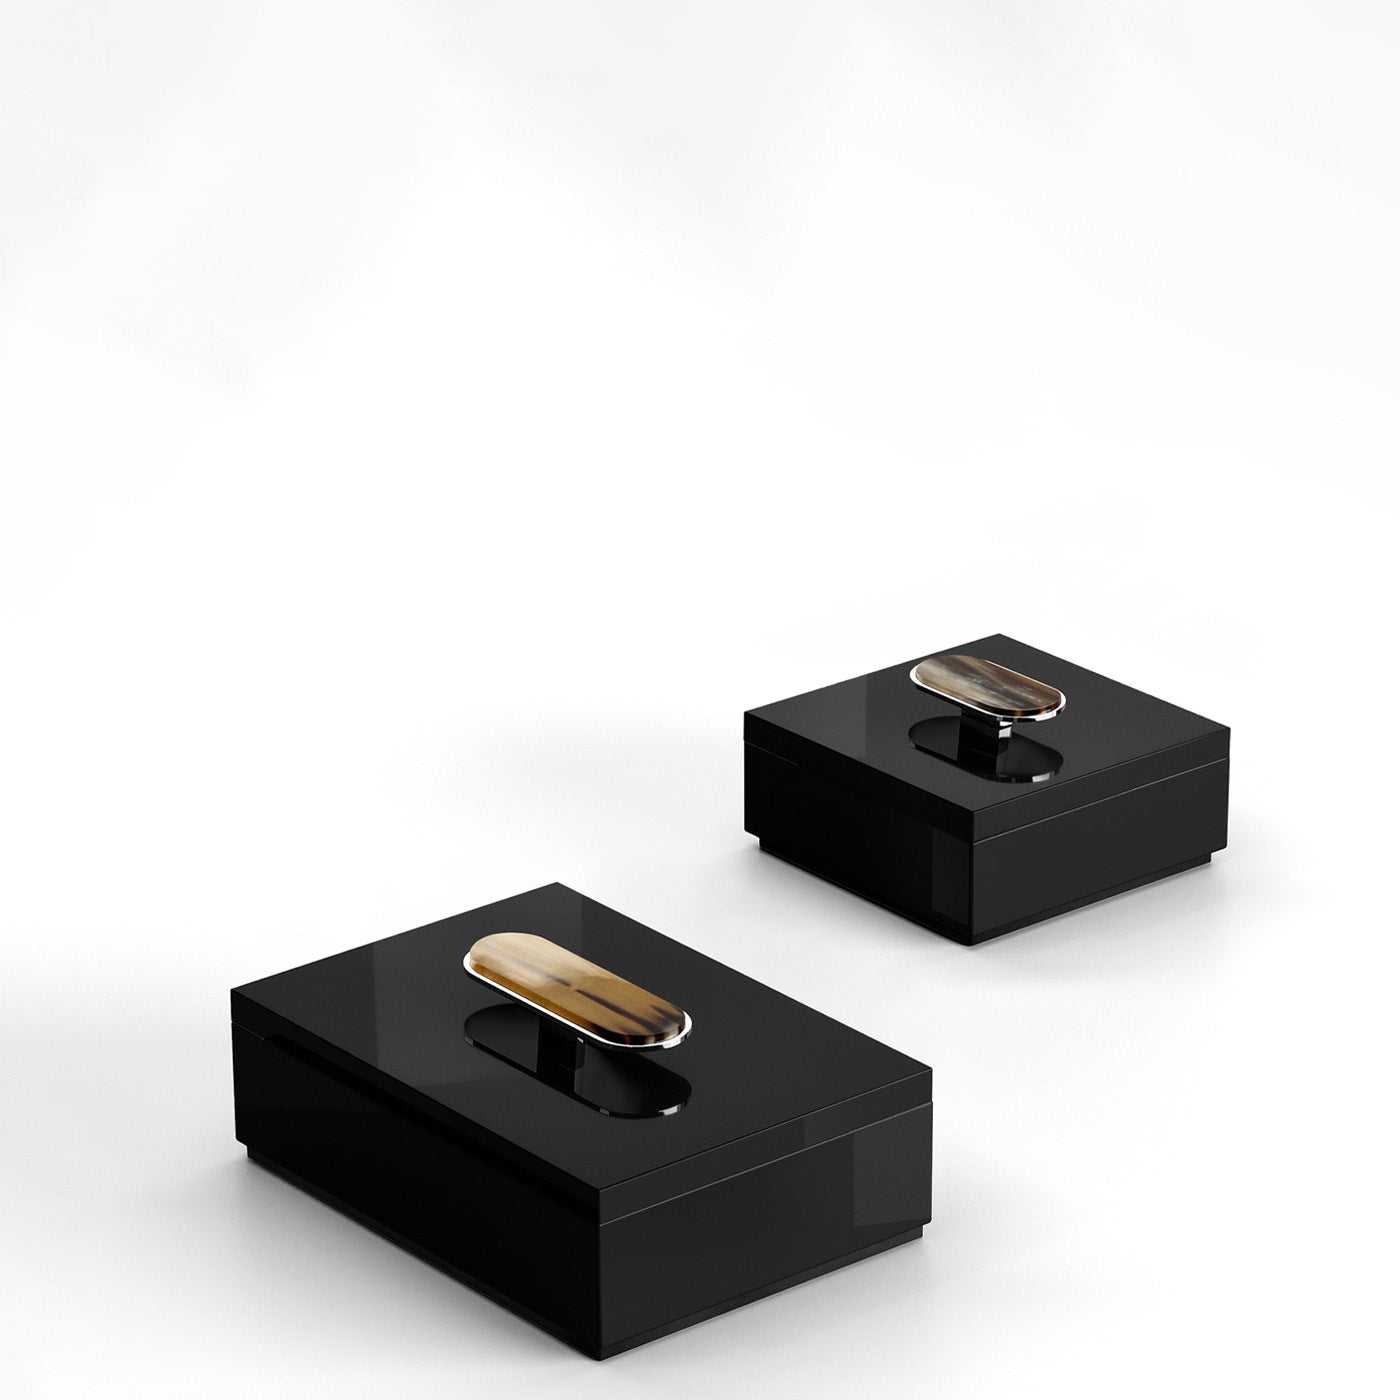 Arcahorn Priora Box | Wood with Lacquered Black Gloss Finish | Lid in Wood with Lacquered Black Gloss Finish | Handle in Horn and Chromed Brass | Elegant Storage Solution | Perfect for Yacht Decor | Explore a Range of Luxury Home Accessories at 2Jour Concierge, #1 luxury high-end gift & lifestyle shop